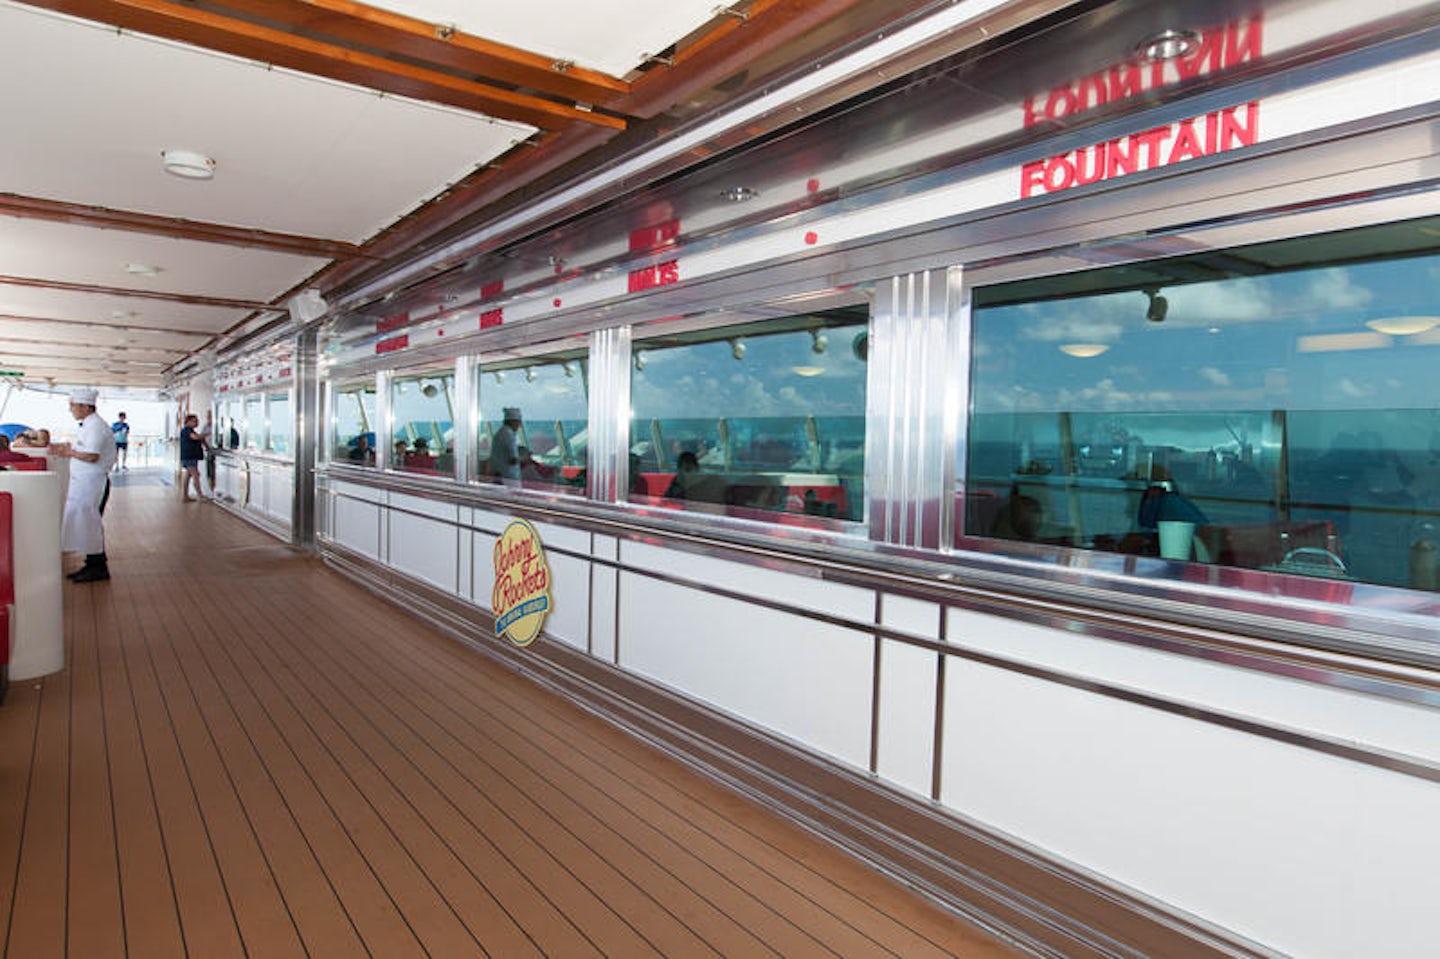 Johnny Rockets on Independence of the Seas